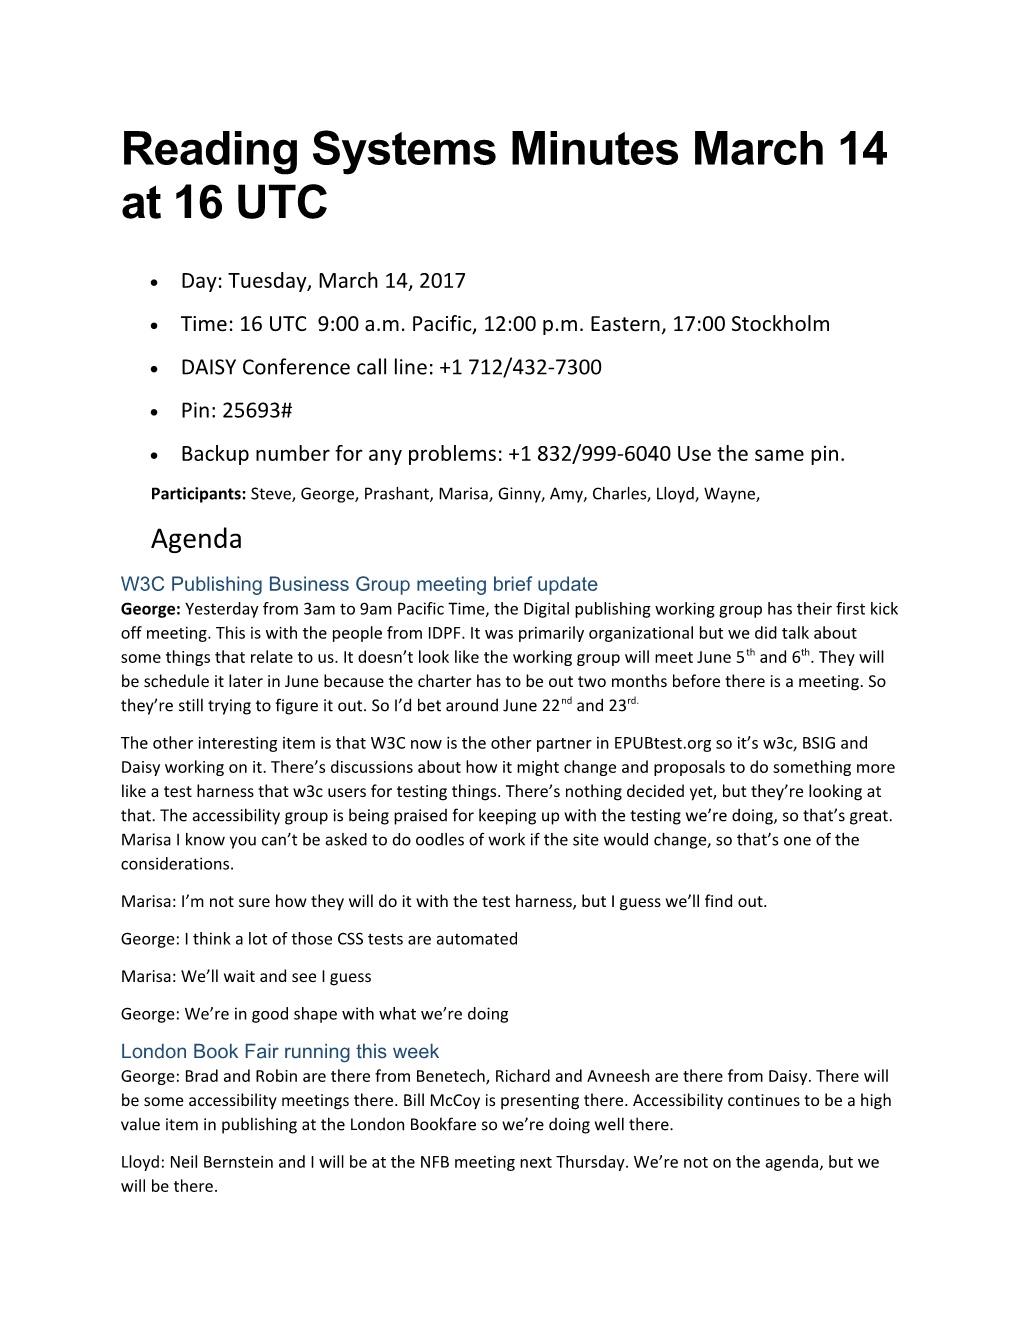 Reading Systems Minutes March 14 at 16 UTC